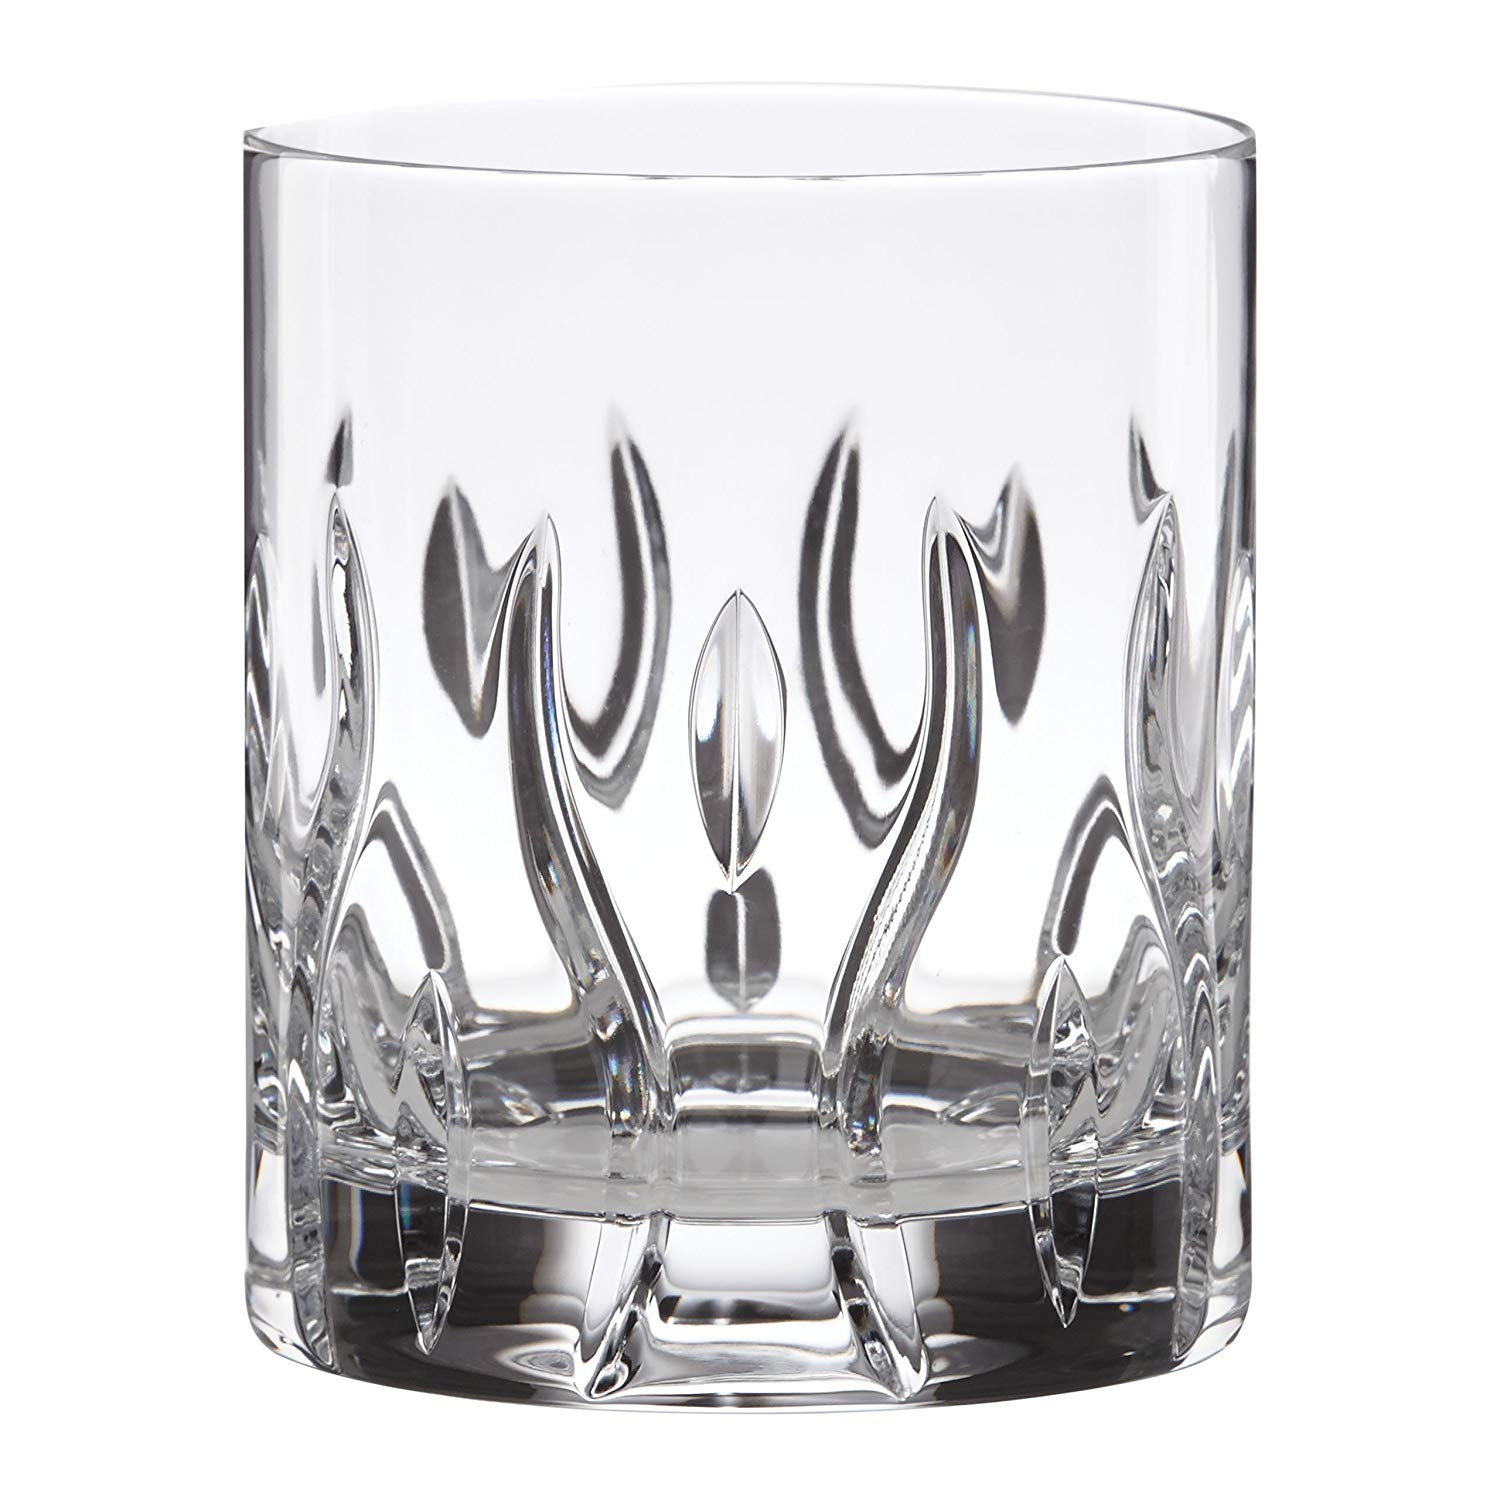 10 Trendy Rogaska Crystal Vase Price 2022 free download rogaska crystal vase price of amazon com lenox 857141 irish spring darcy double old fashioned intended for amazon com lenox 857141 irish spring darcy double old fashioned glasses set of 2 cl